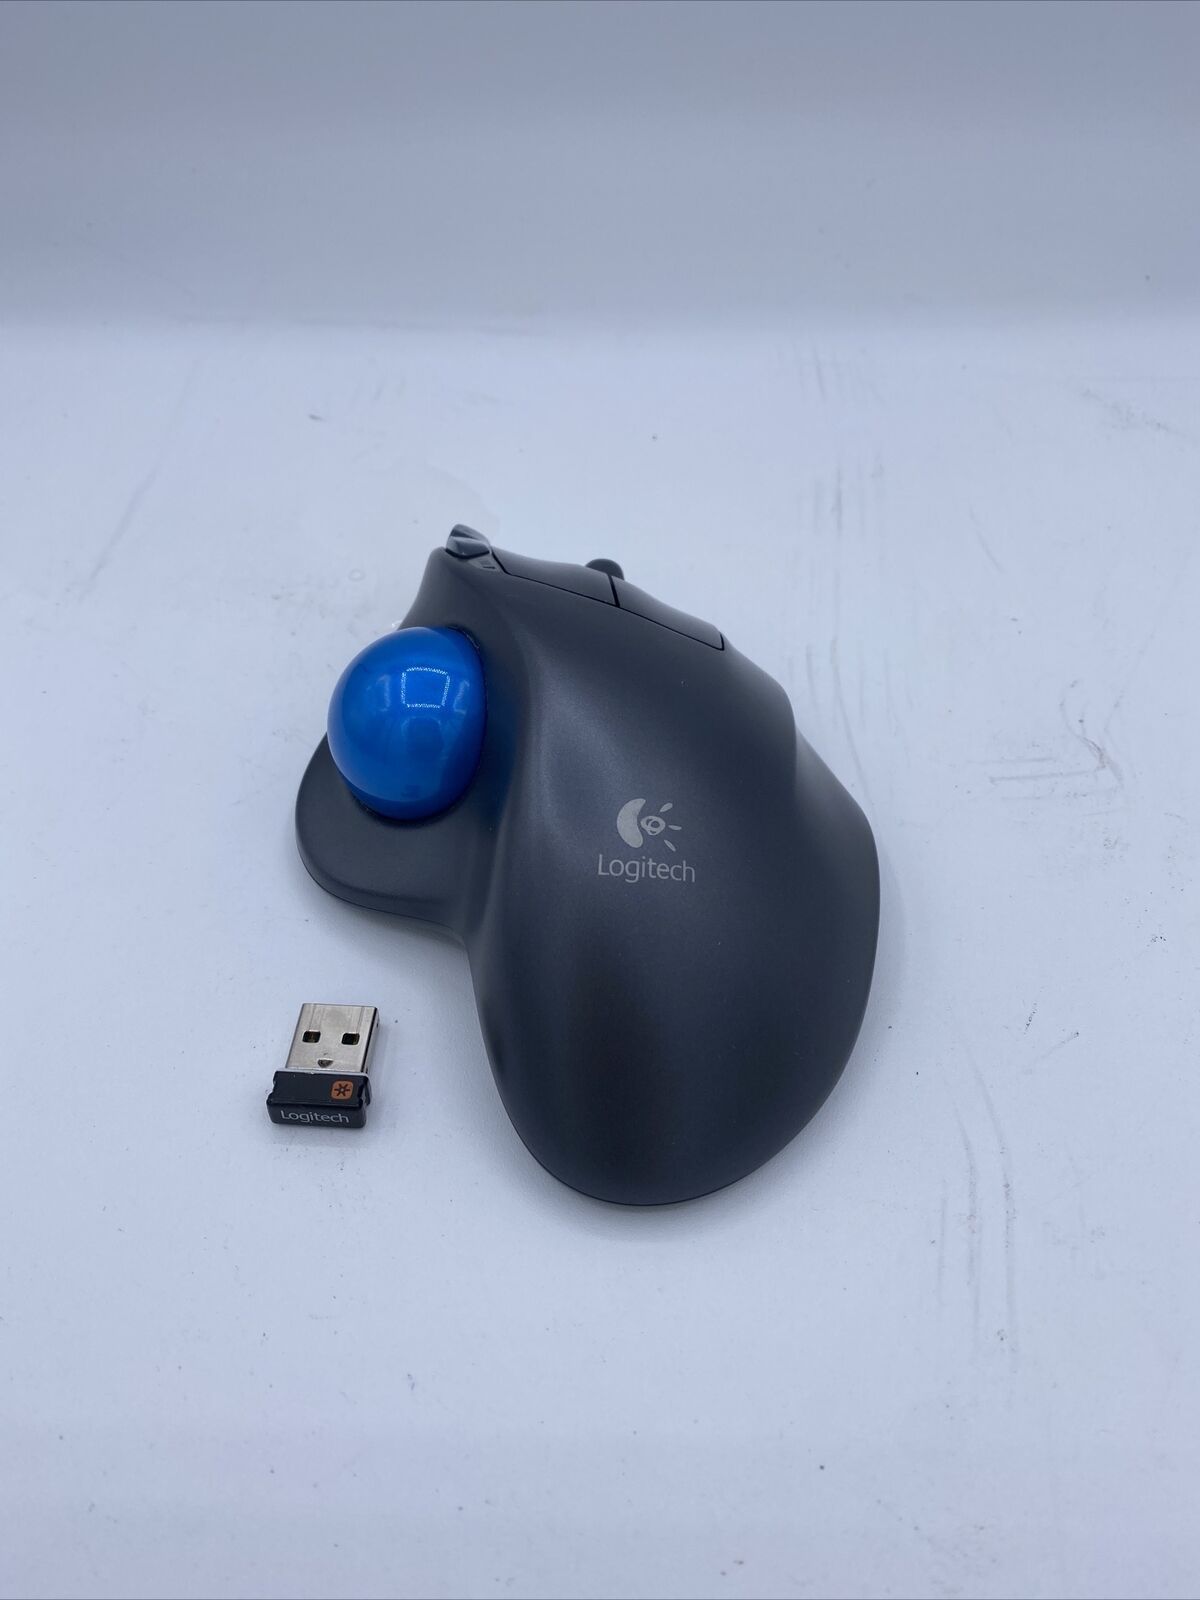 Logitech M570 Wireless Trackball Mouse With Receiver Dongle - Tested